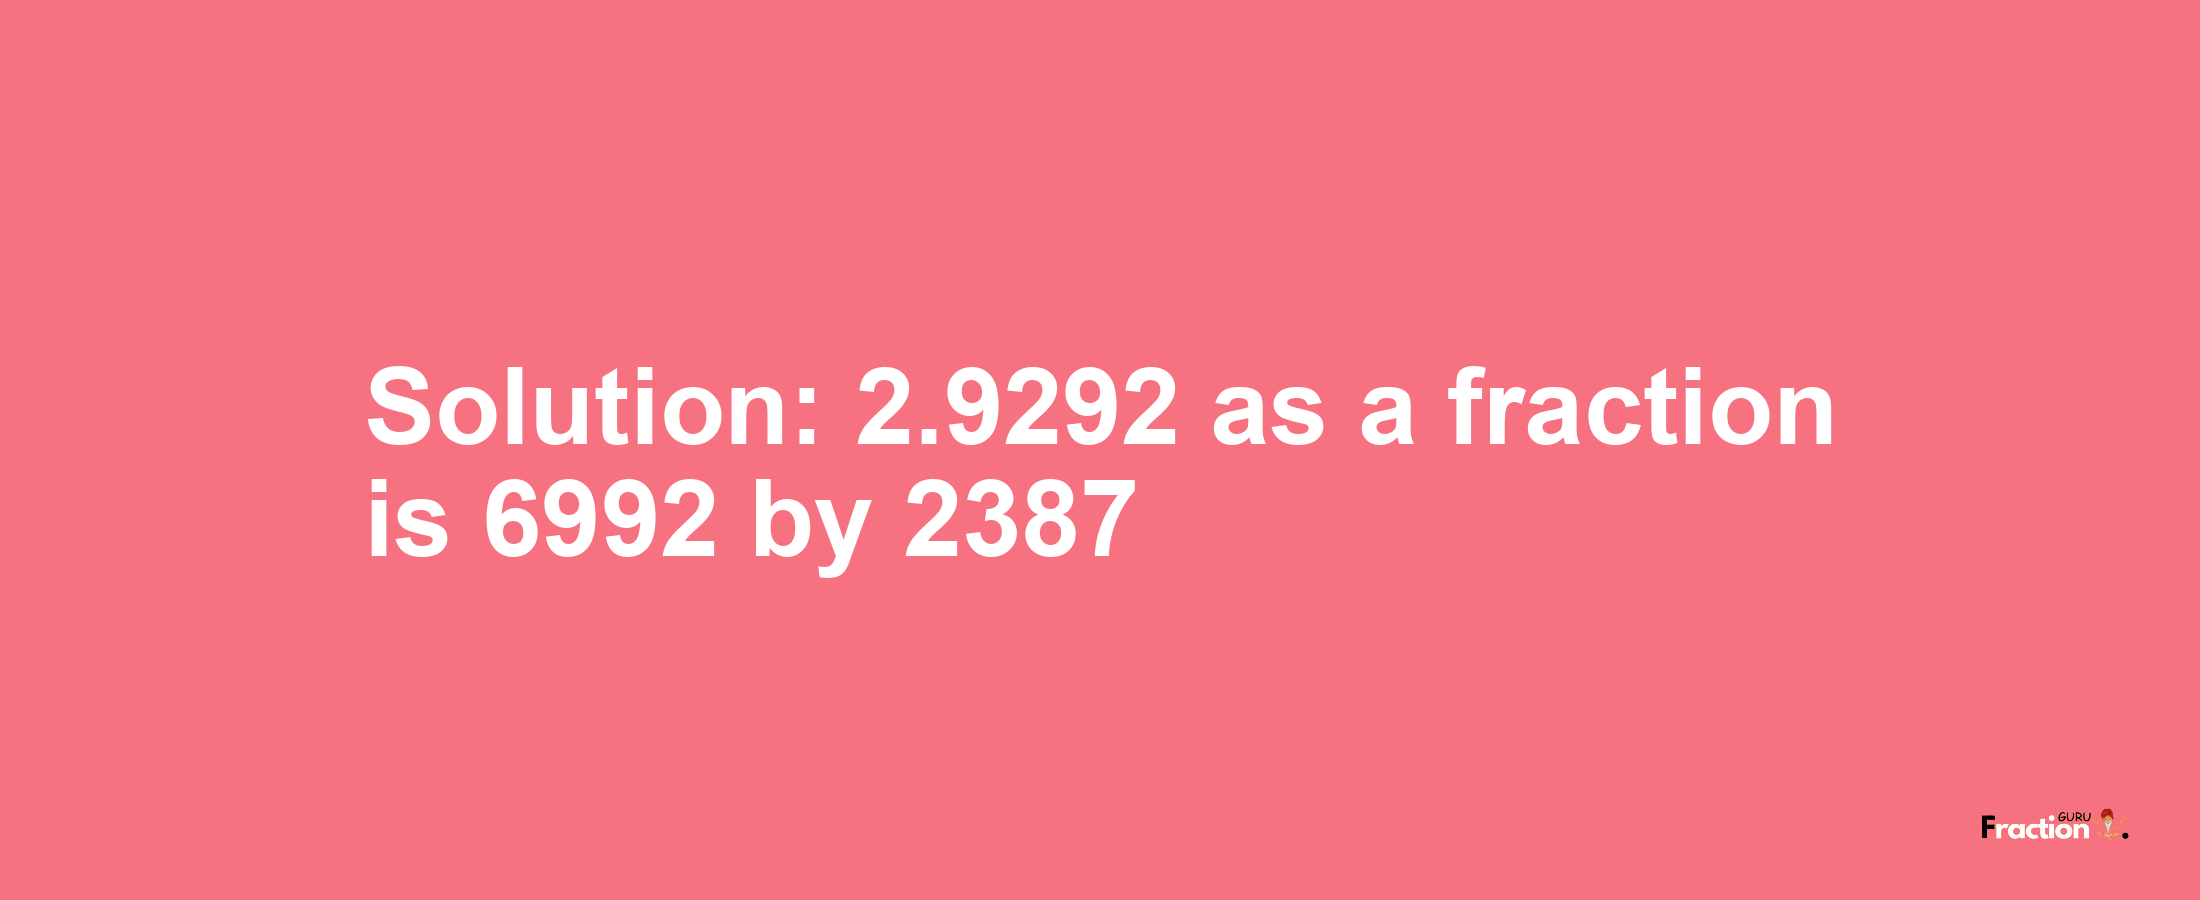 Solution:2.9292 as a fraction is 6992/2387